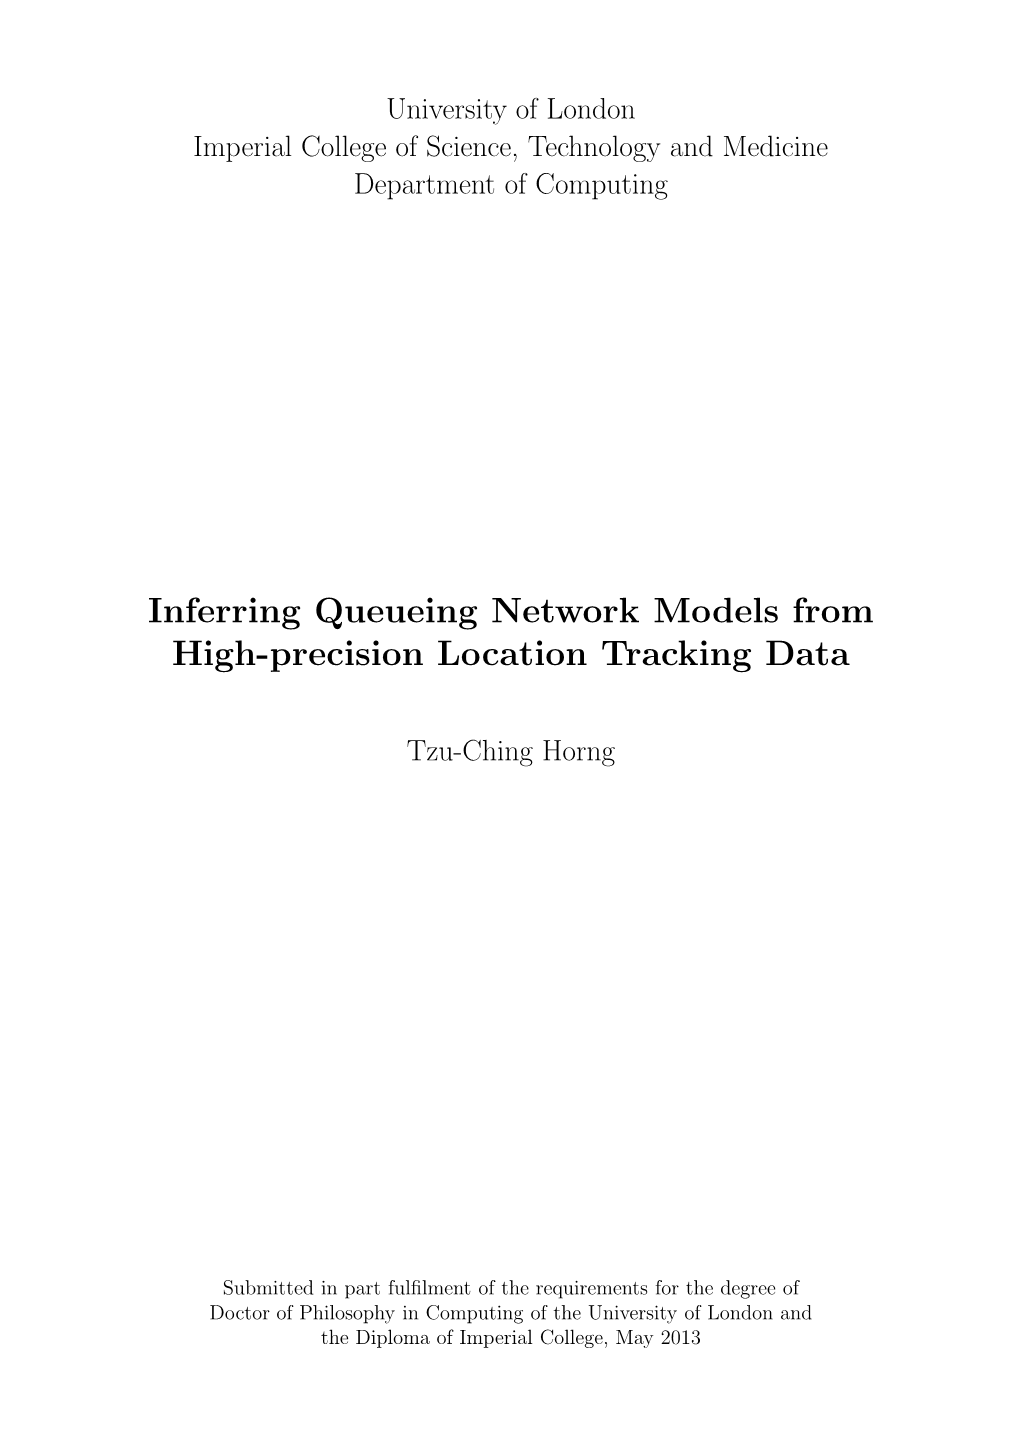 Inferring Queueing Network Models from High-Precision Location Tracking Data